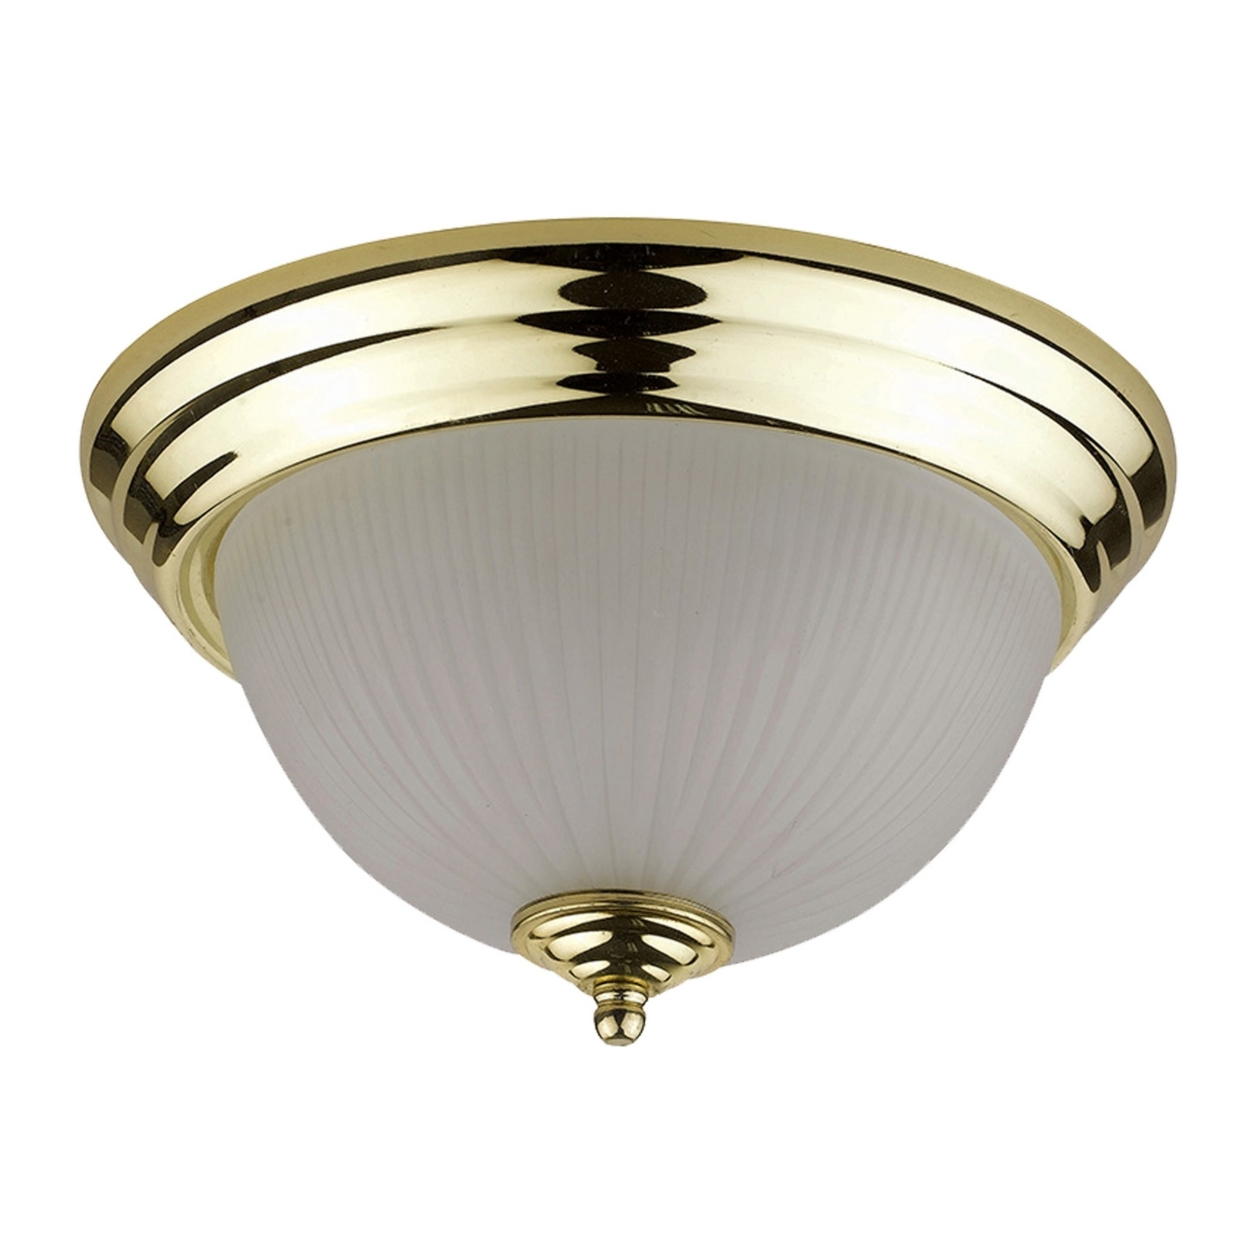 Metal Ceiling Lamp With Dome Shaped Shade And Finial Top, Clear And Gold- Saltoro Sherpi